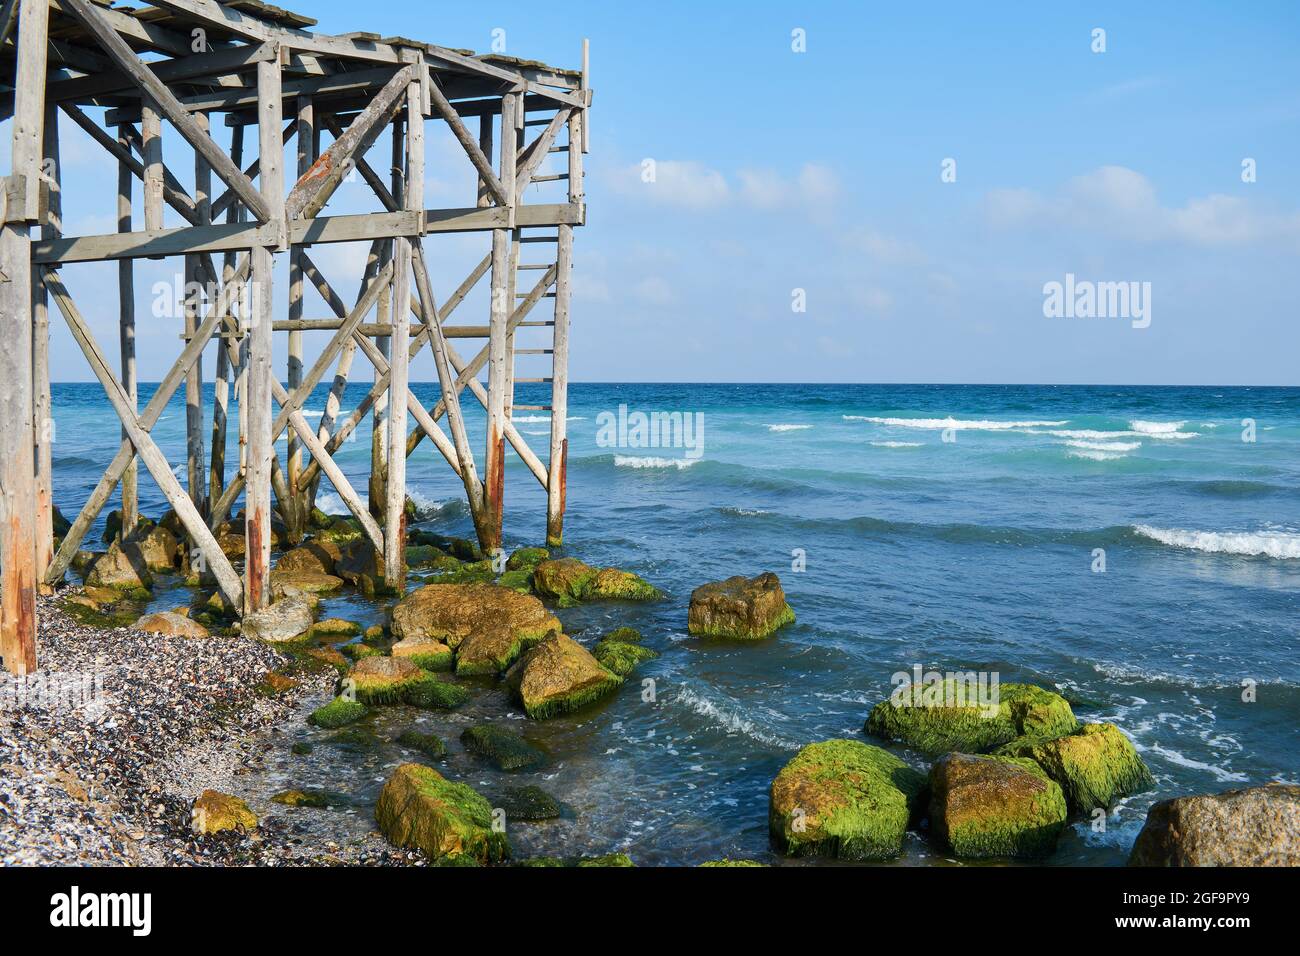 Landscape from Tuzla with the Black Sea, sand and rocks Stock Photo